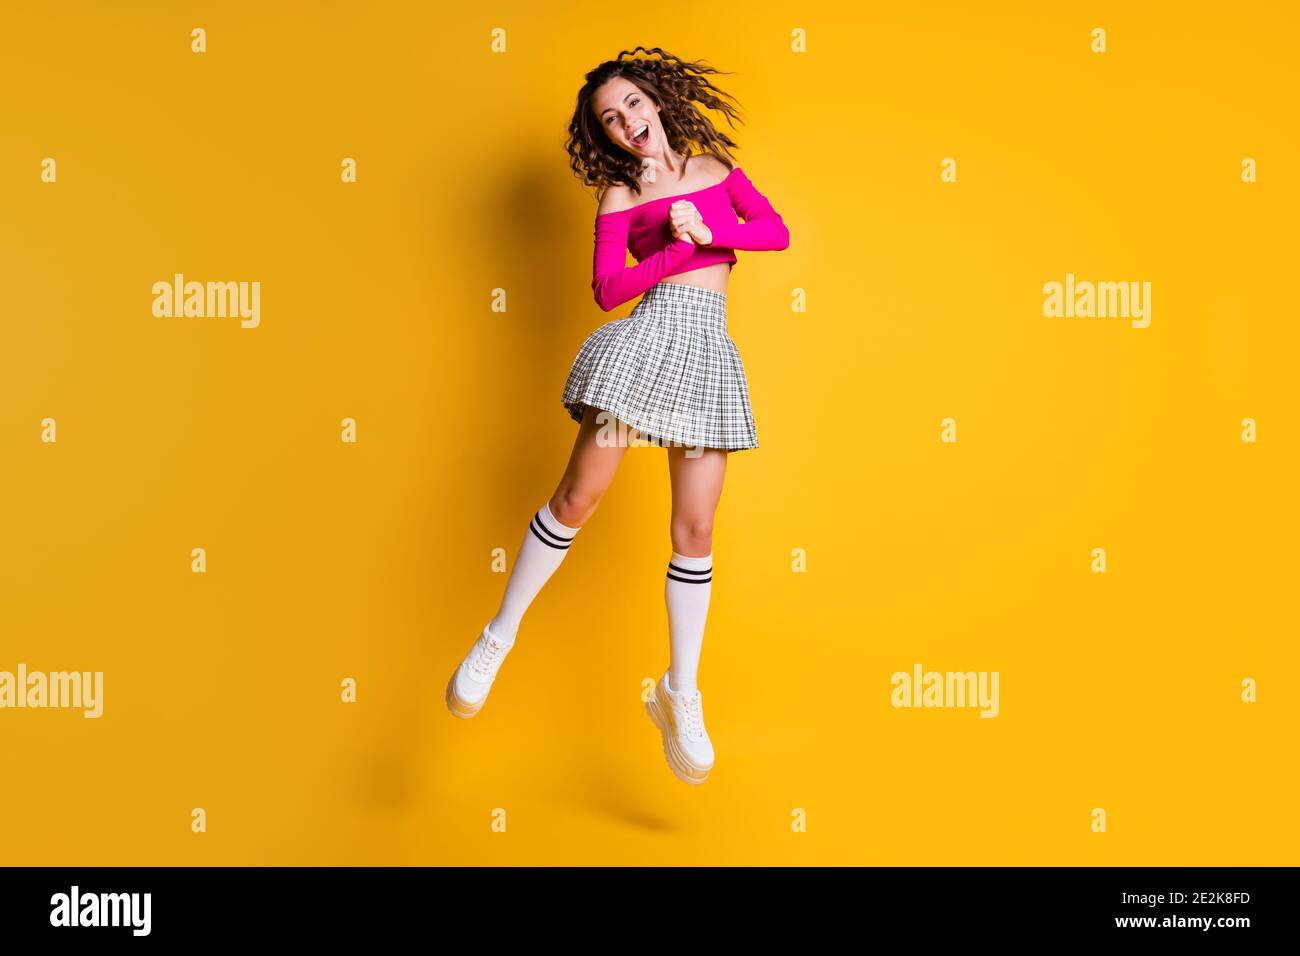 Photo portrait of curly brunette girl jumping holding hands together screaming wearing casual fuchsia crop-top plaid skirt knee-high socks white shoes Stock Photo